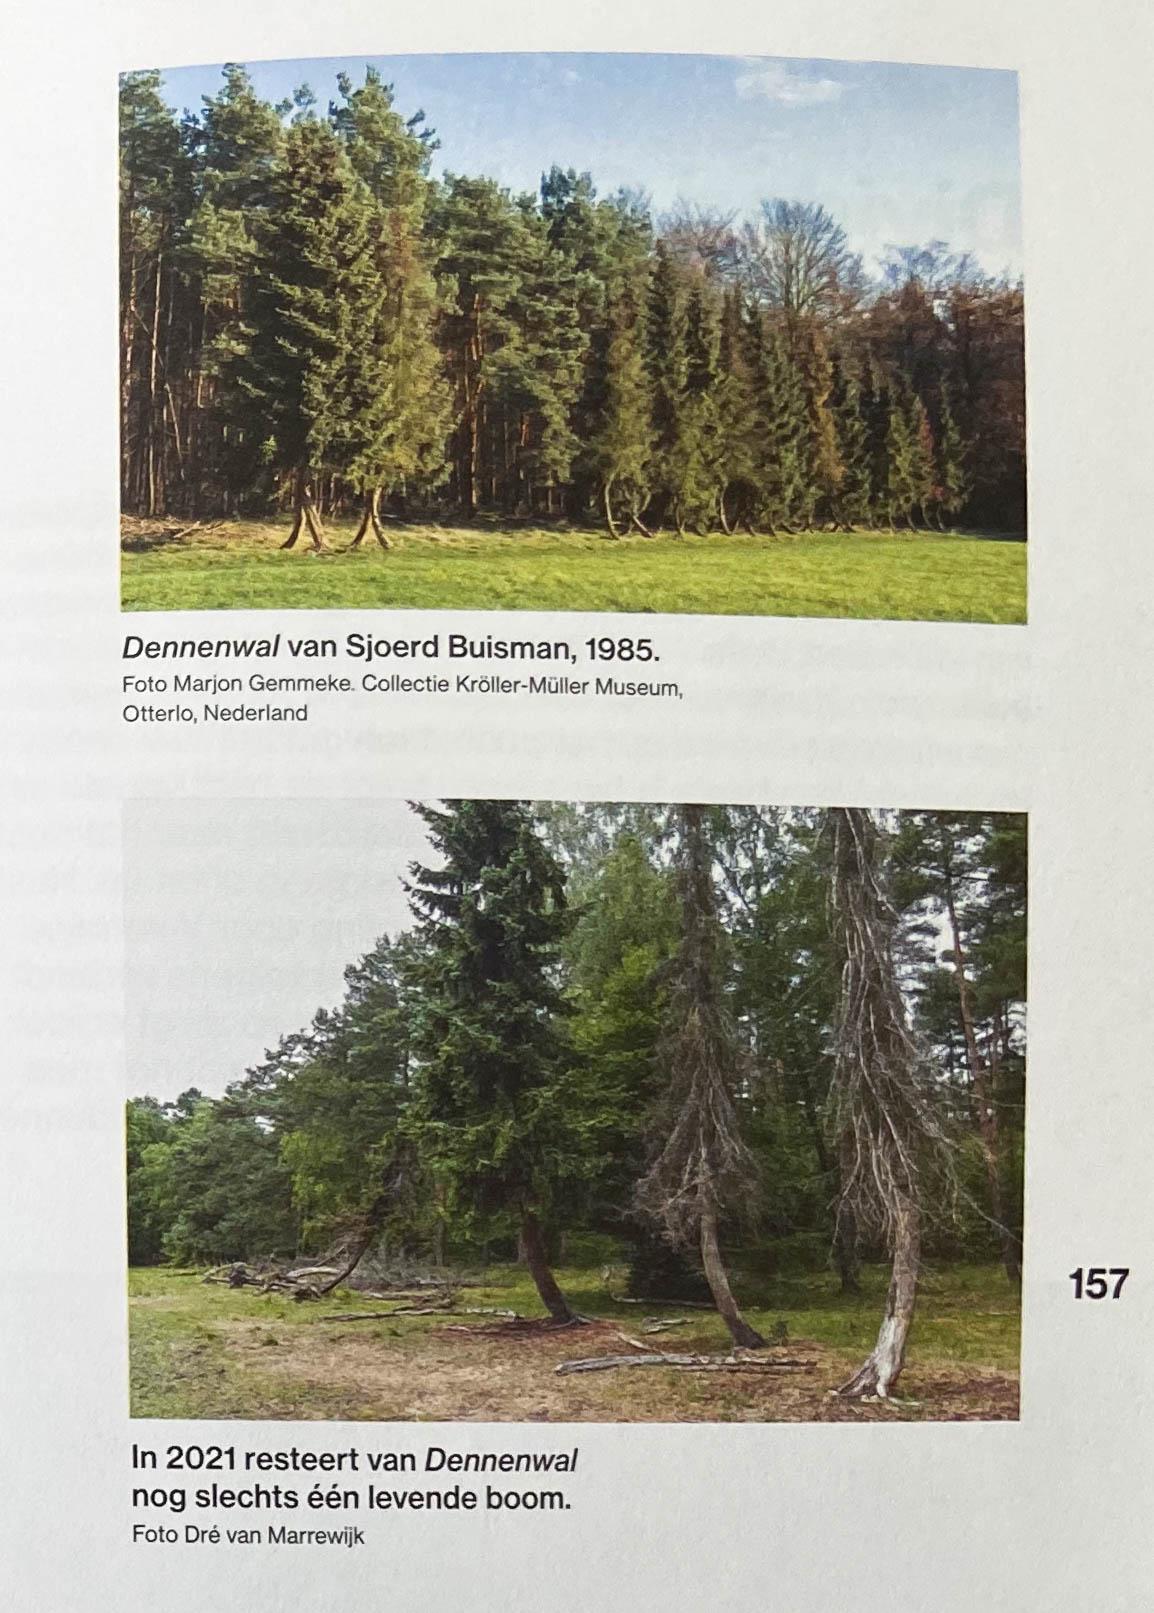 a scan from a book with photographs of Pine Wall showing 4 standing trees